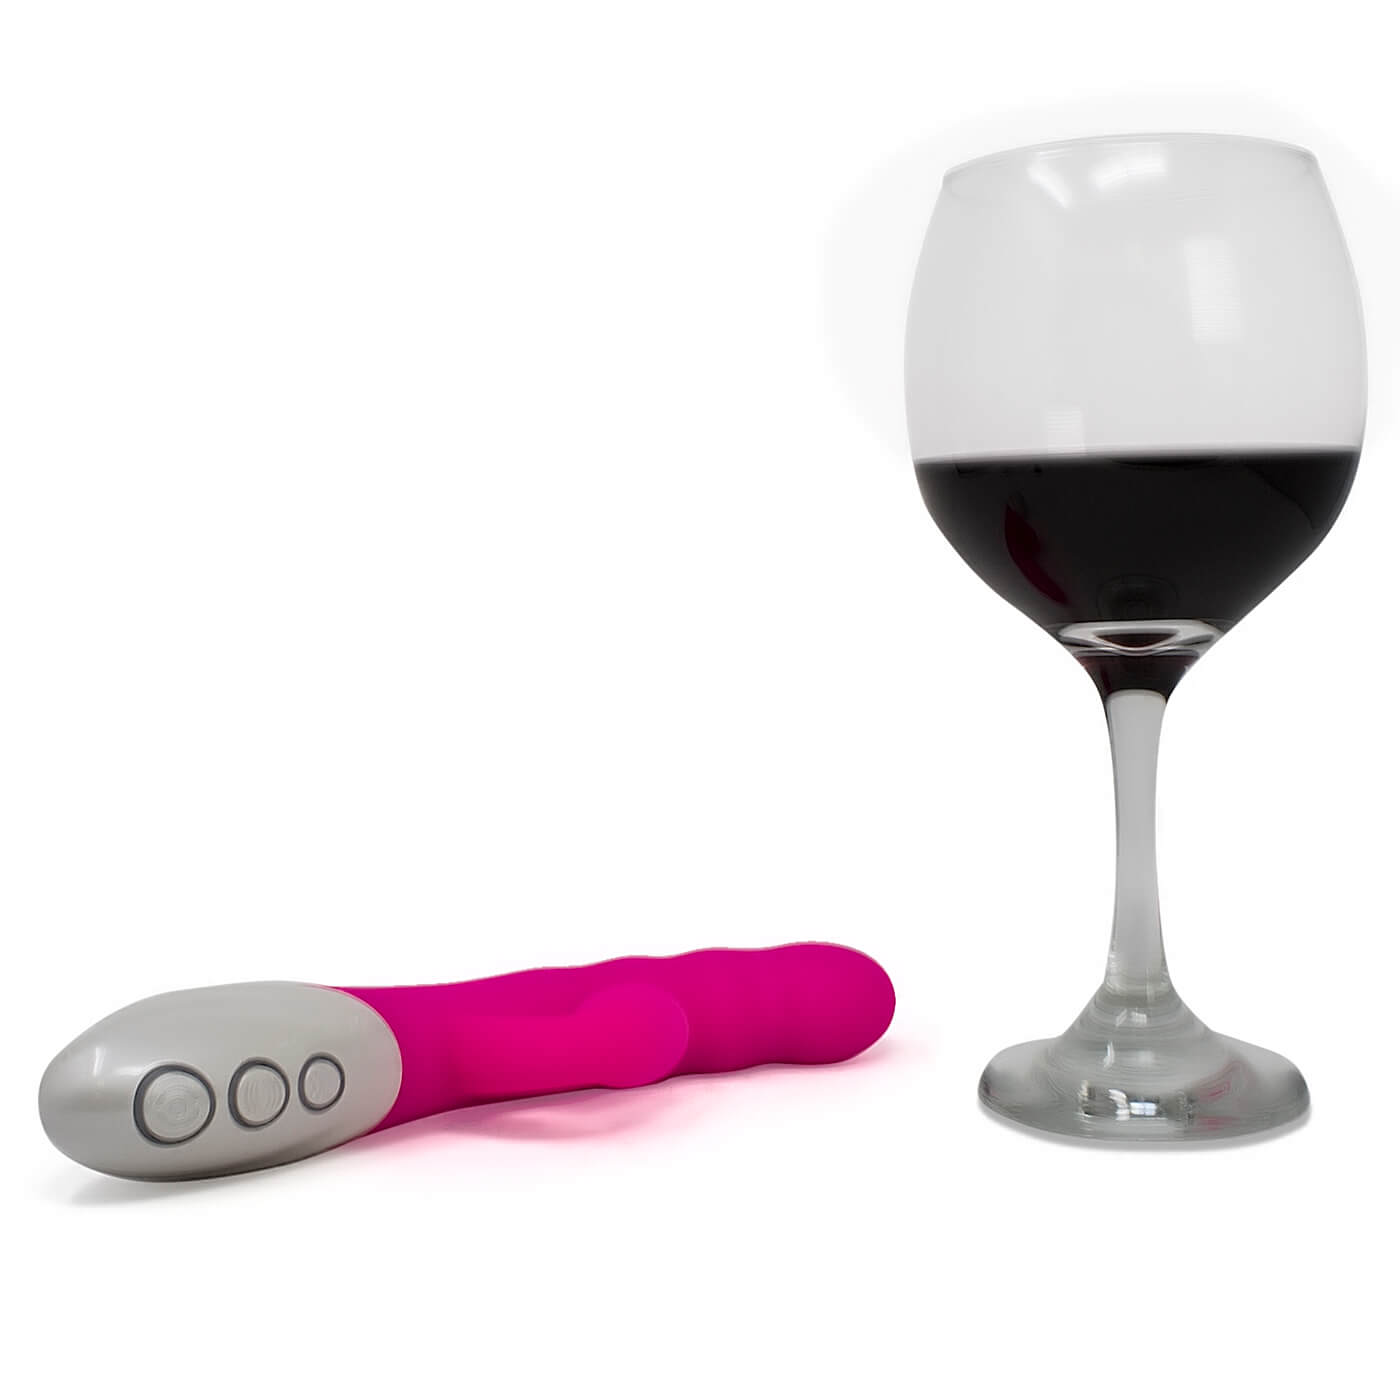 Instant O 8 Function Waterproof USB Rechargeable G-Spot Dual Vibrator